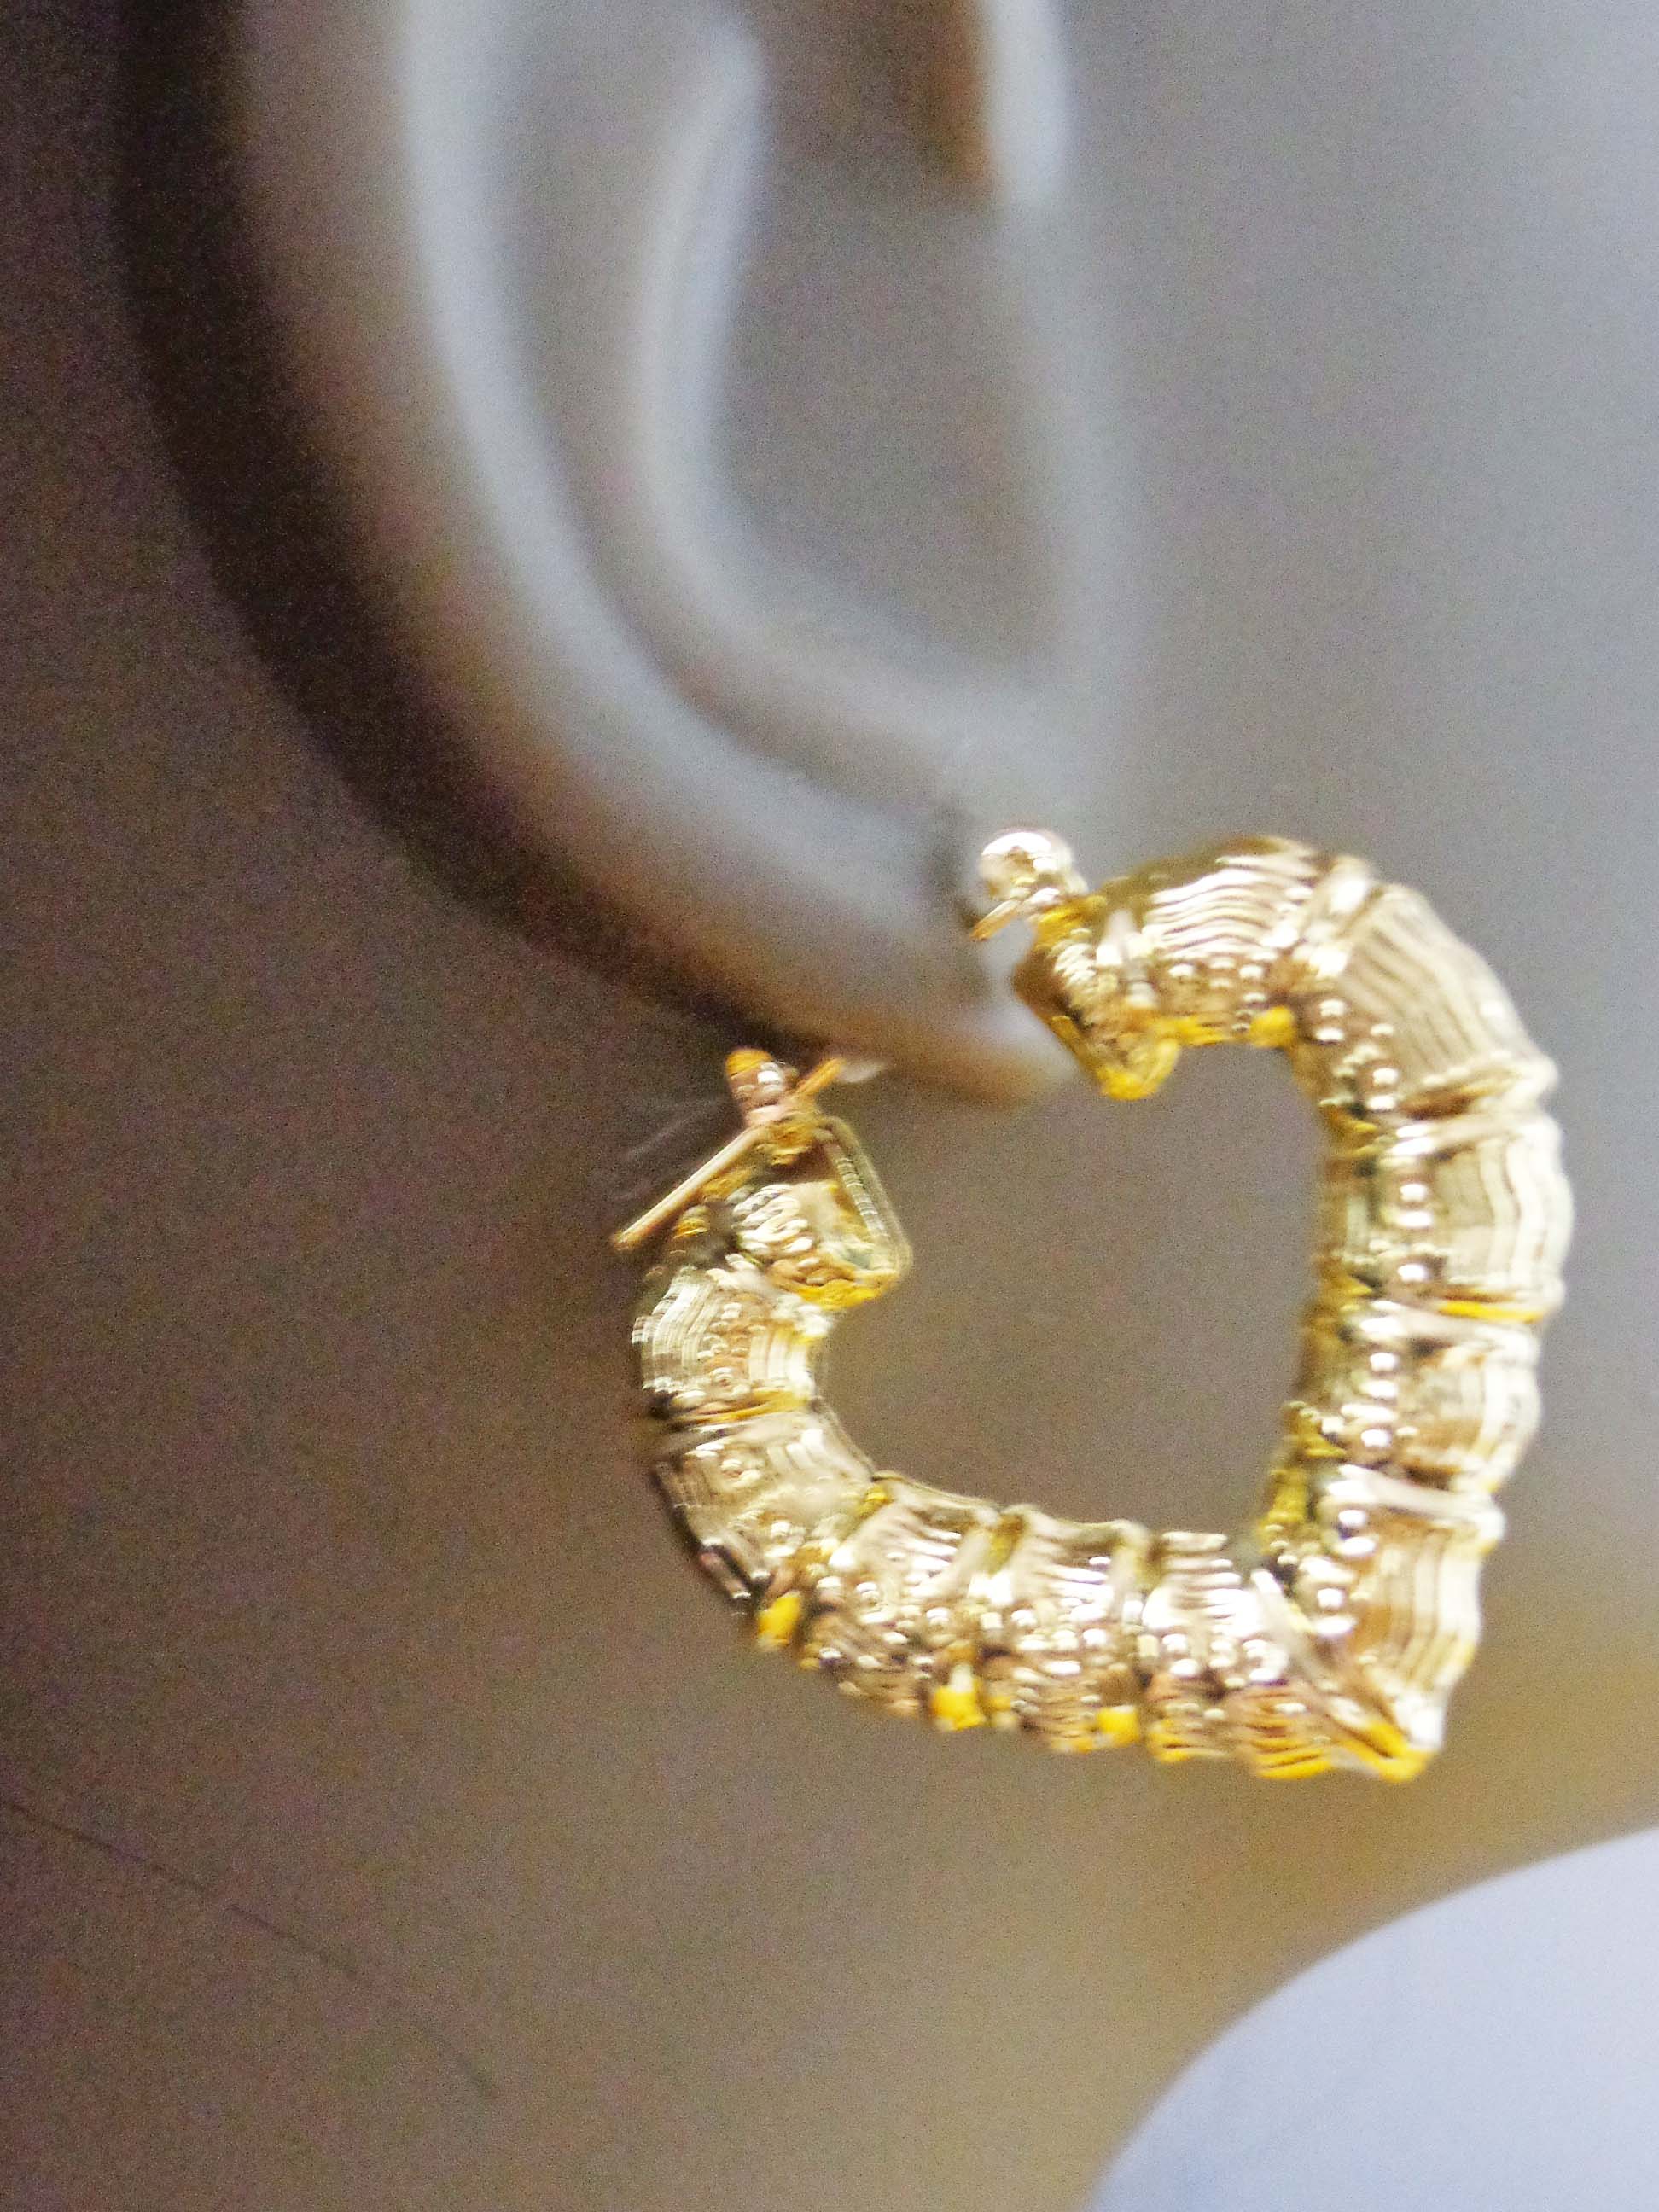 Bamboo Heart Earrings Gold Tone Heart 1.25 inch Hoops Small - image 3 of 3